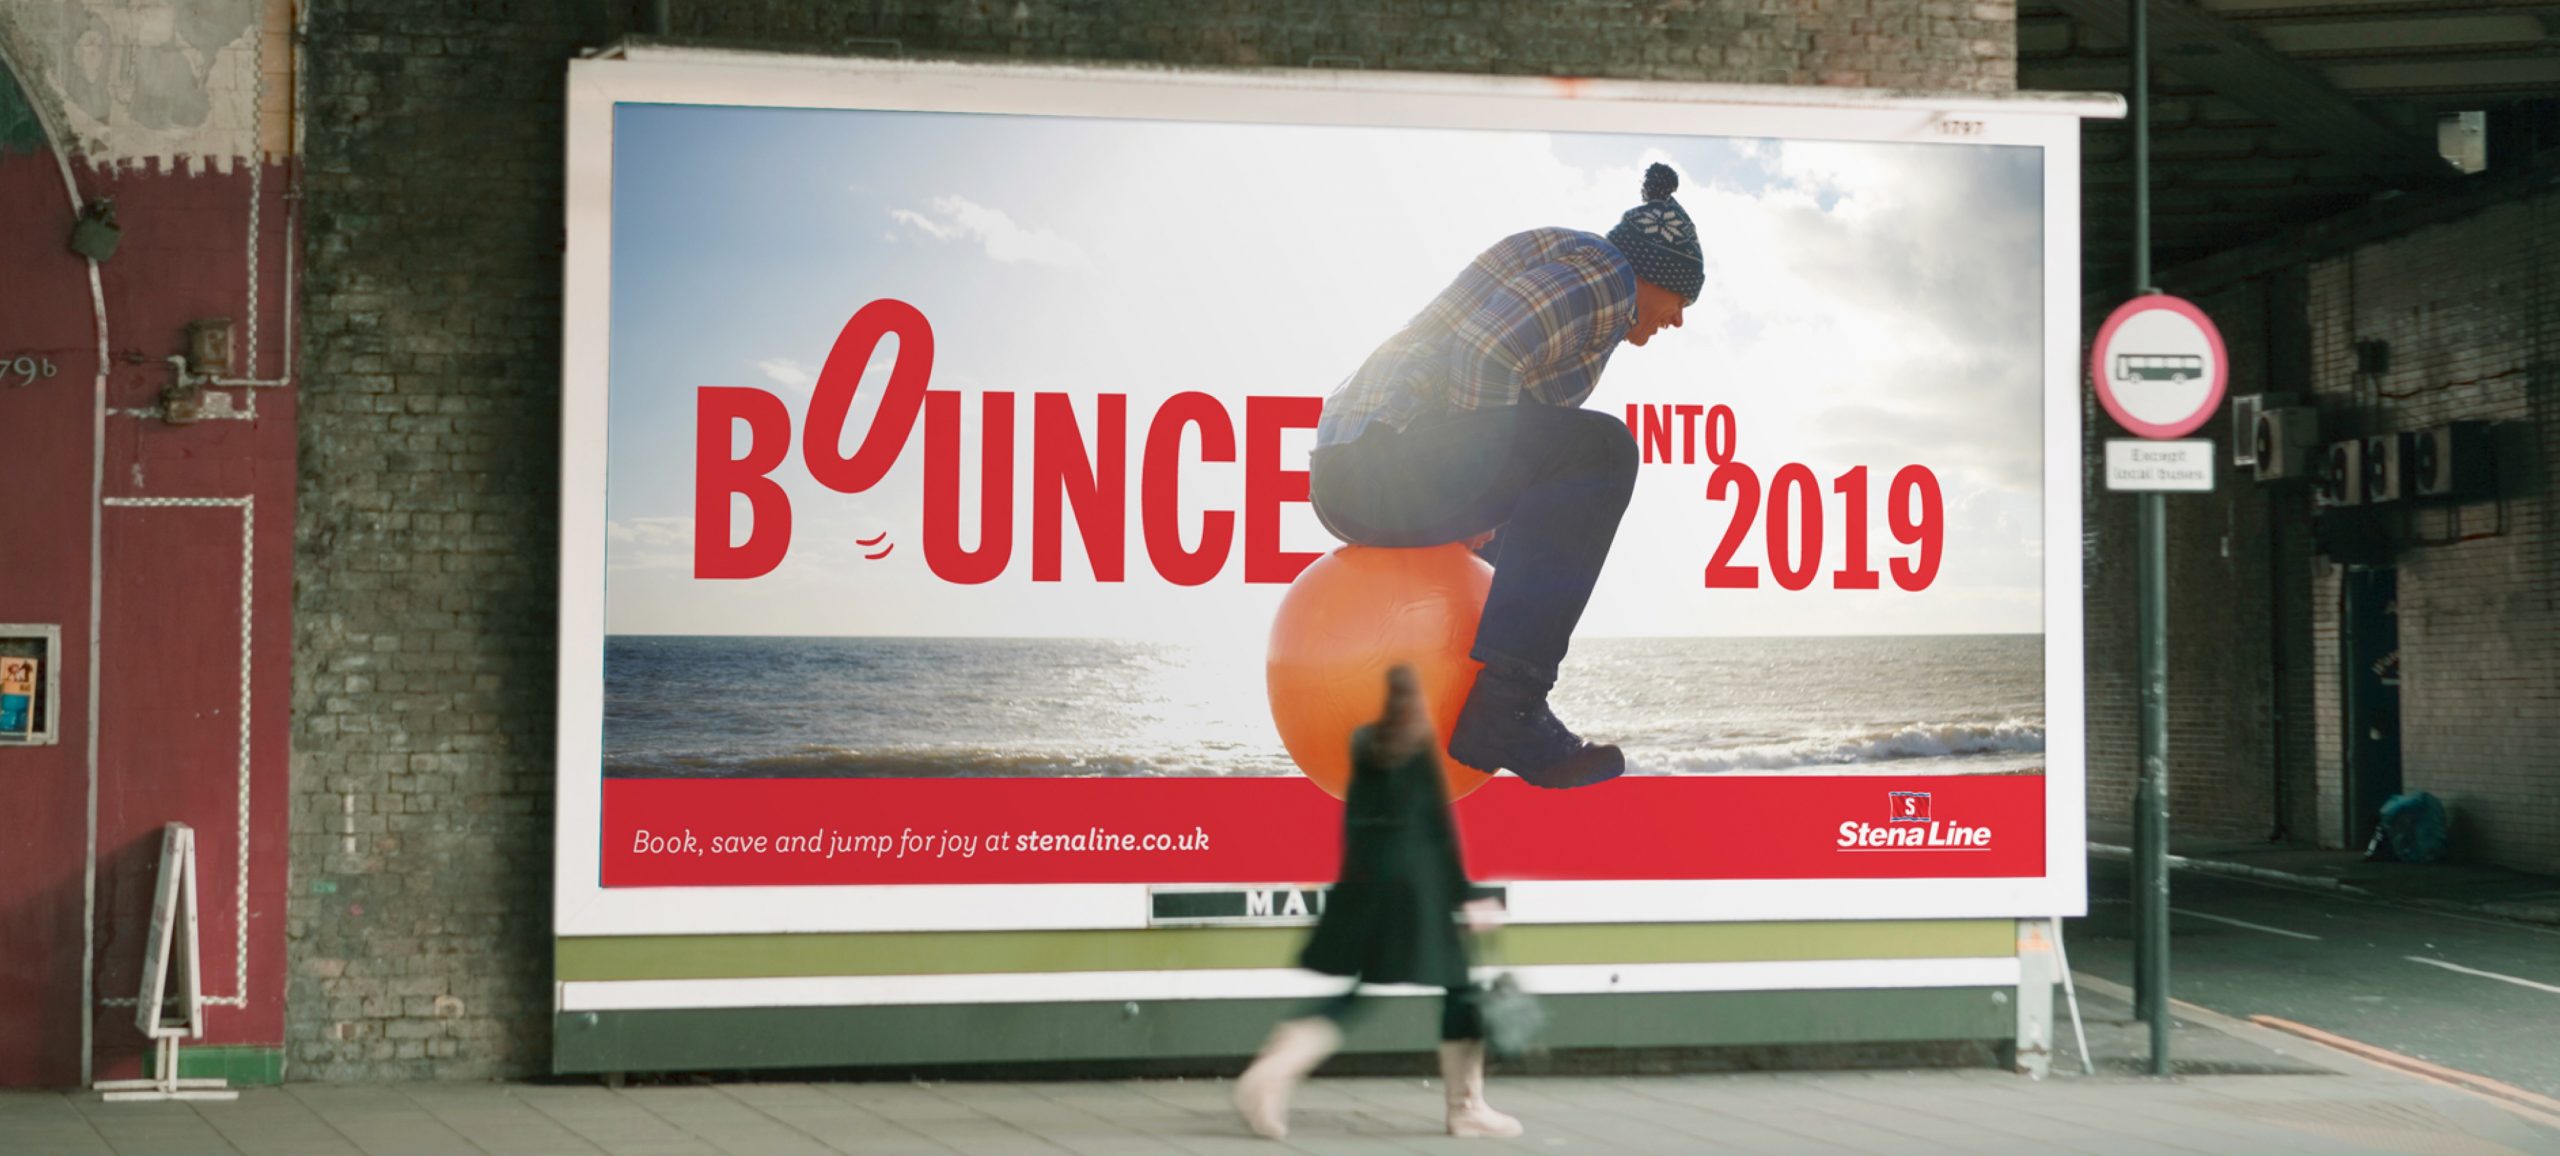 Poster for Stena Line, Bounce into 2019, man on spacehopper